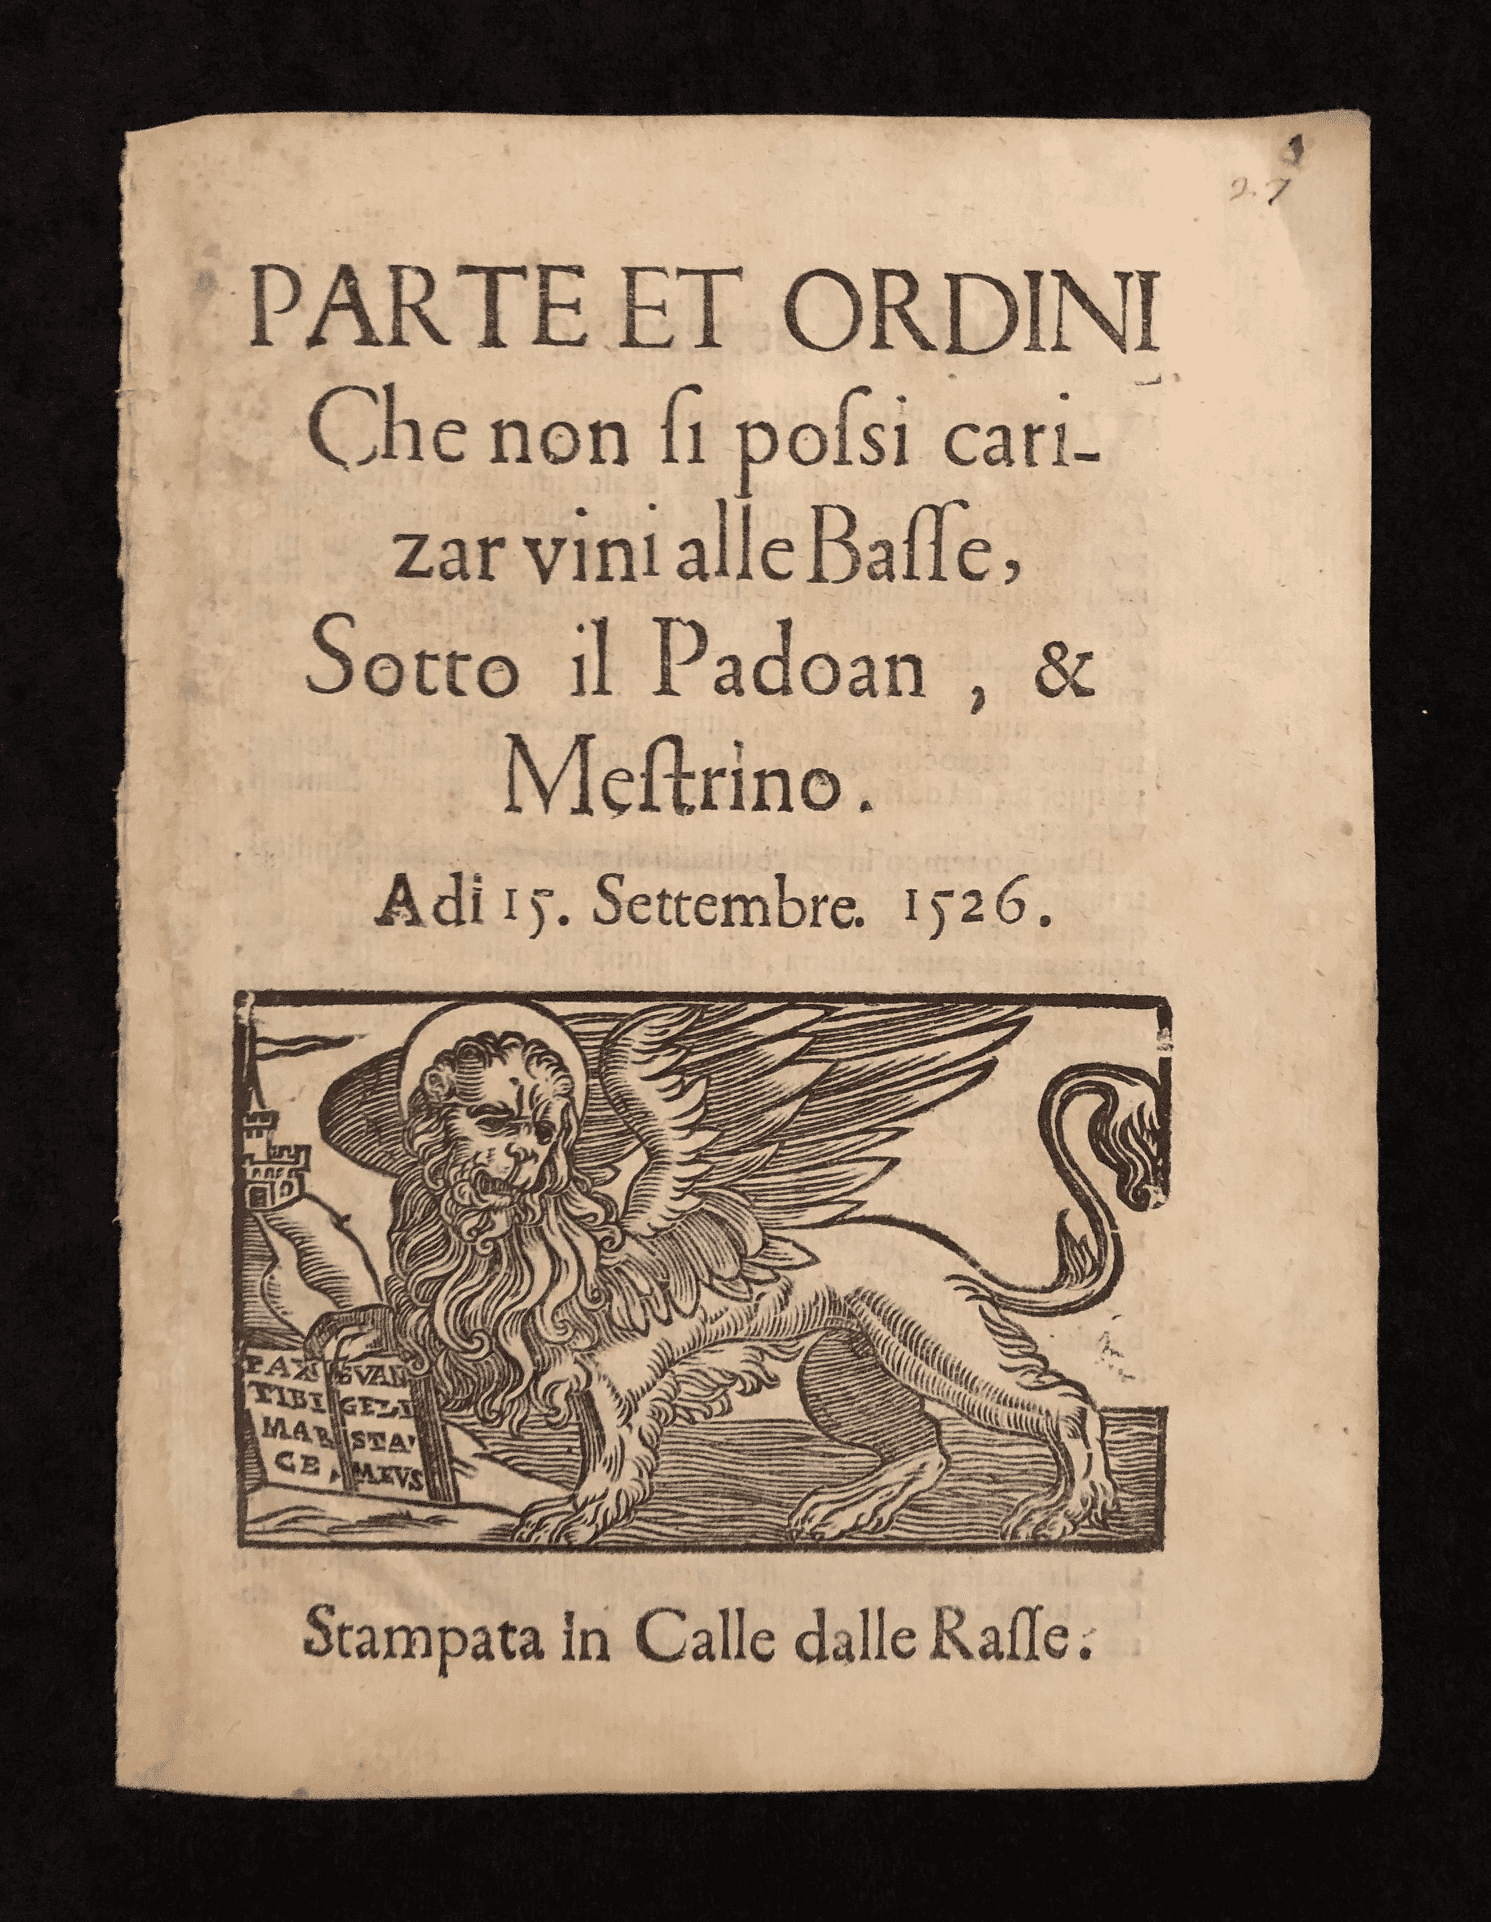 Parte et Ordini- Text of an order dictating how wine for sale must be transported through Italy in the early 16th century